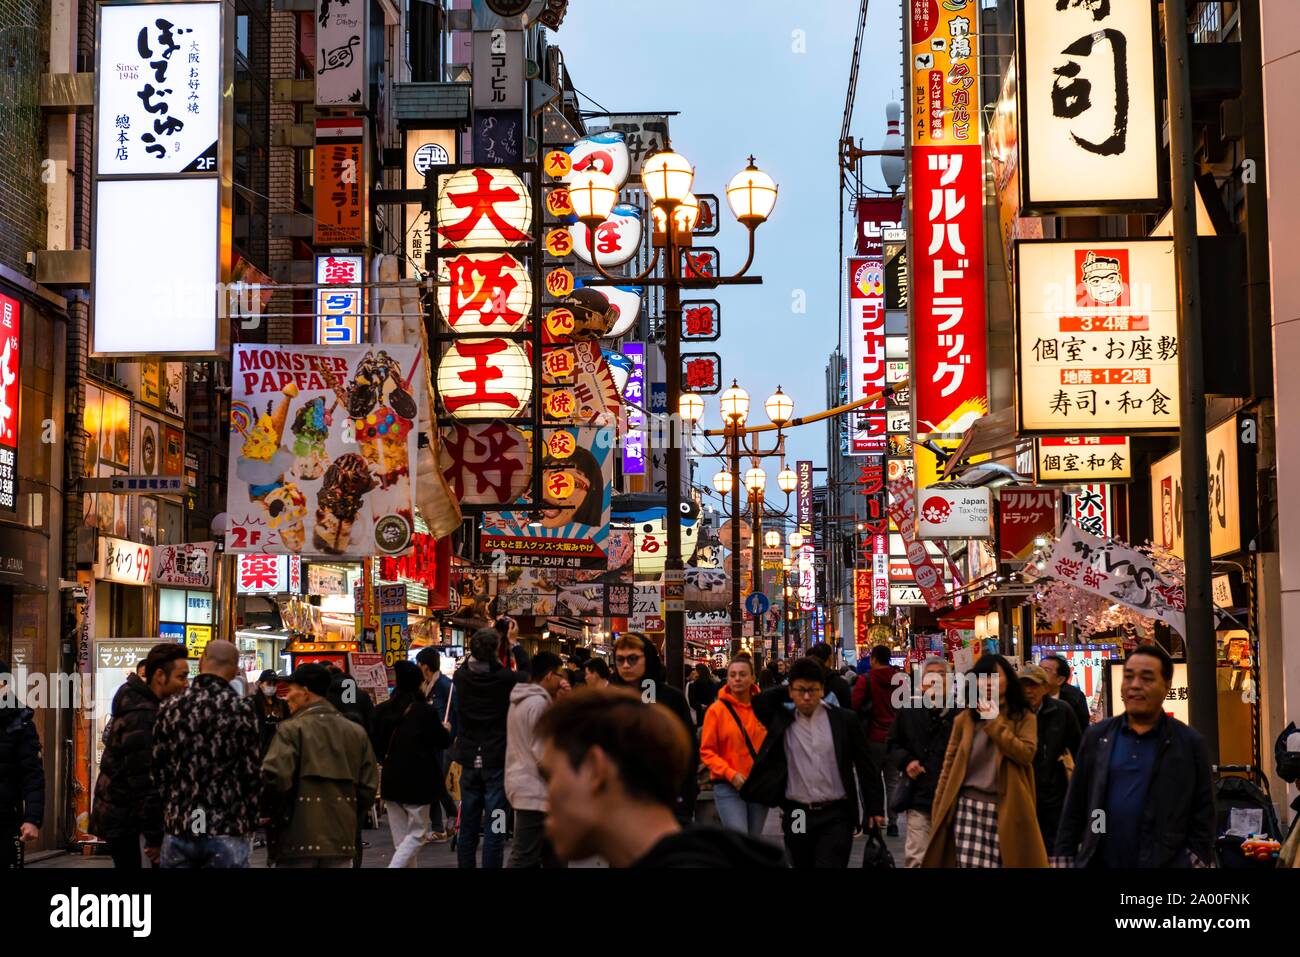 Crowd crowded in pedestrian zone with lots of illuminated advertising for restaurants and shopping centers, Dotonbori, Osaka, Japan Stock Photo